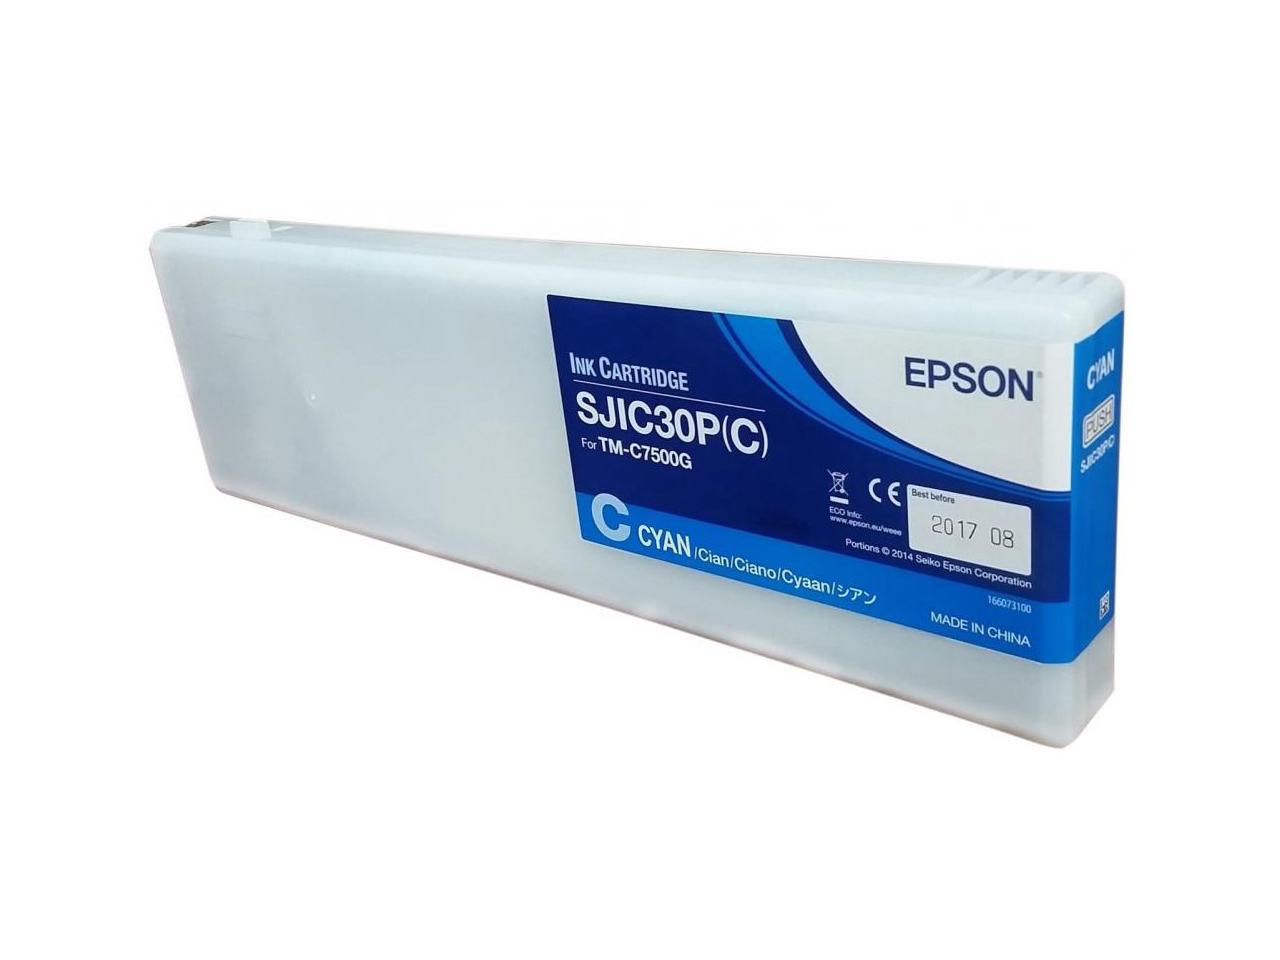 EPSON C33S020636 TM-C7500G CONSUMABLES SJIC30P(C) GLOSS CYAN INK CARTRIDGE FOR COLORWORKS TM-C7500 RESTRICTED TO COLORWORKS PARTNERS ONLY